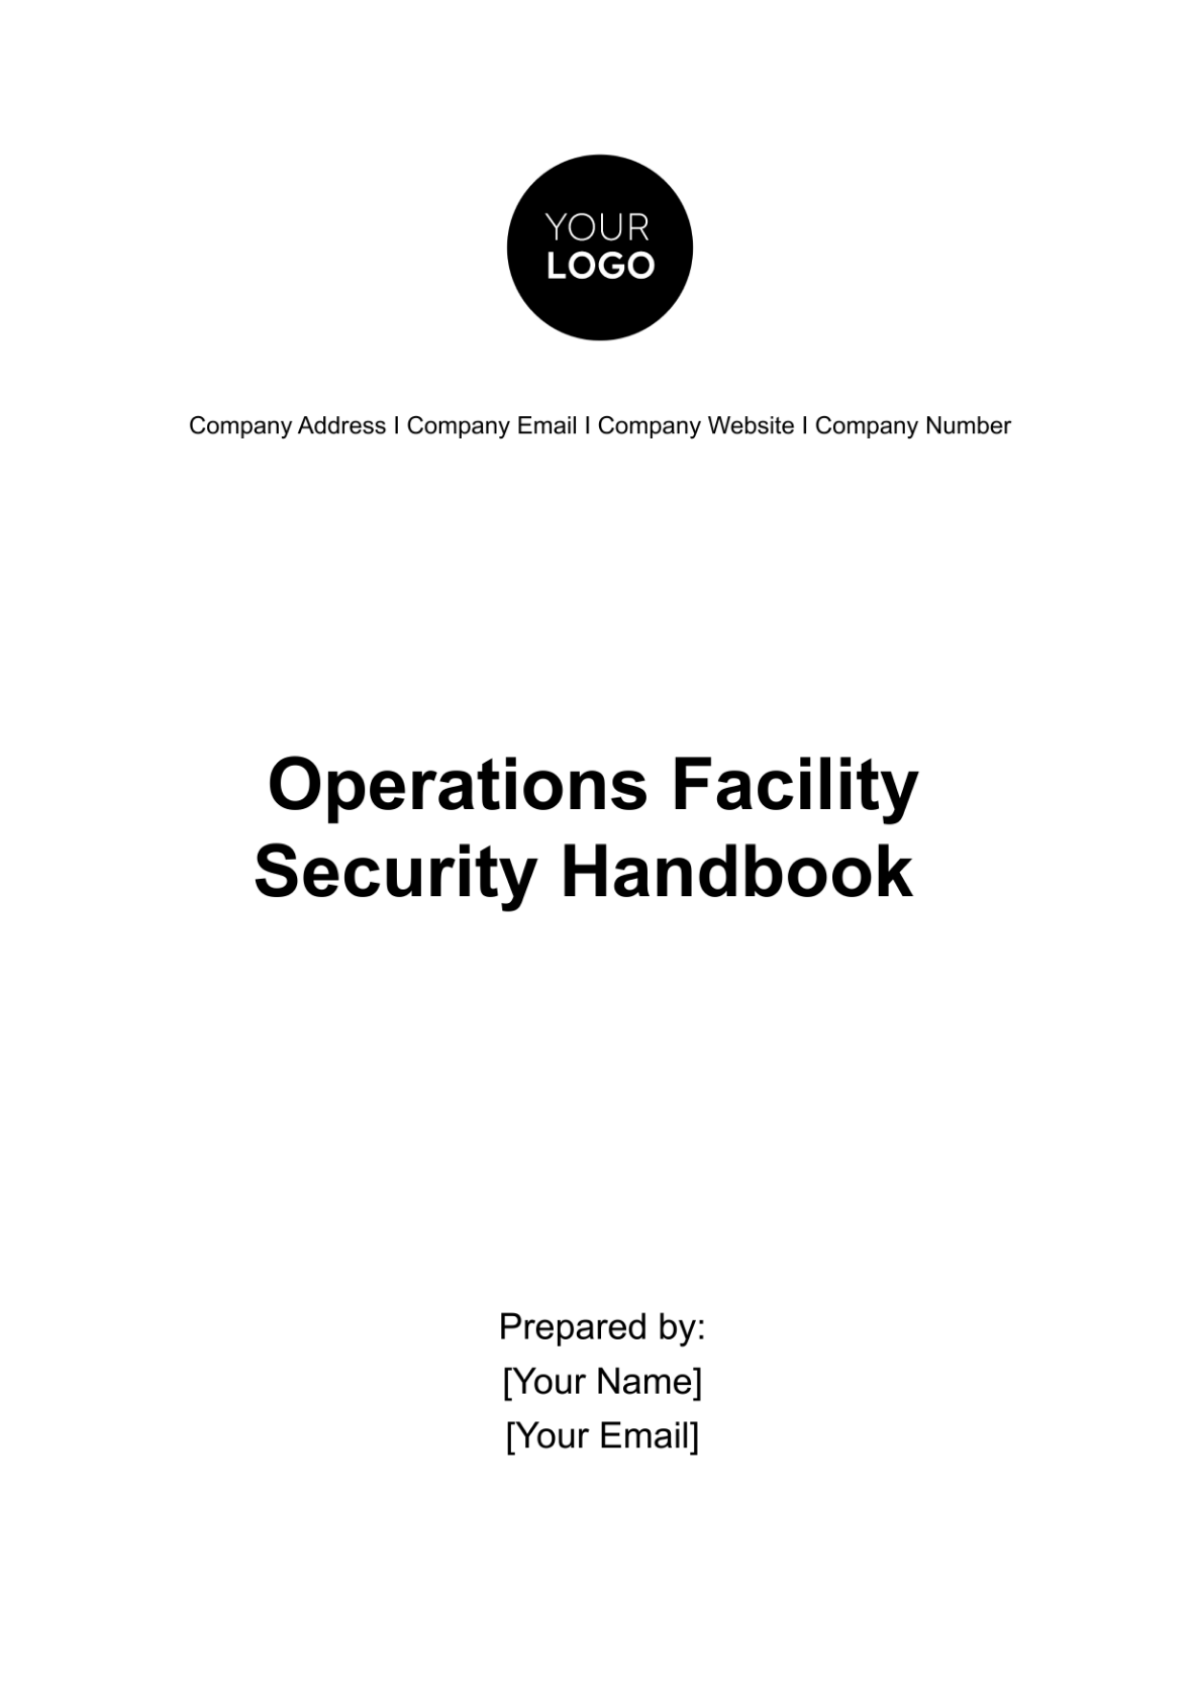 Operations Facility Security Handbook Template